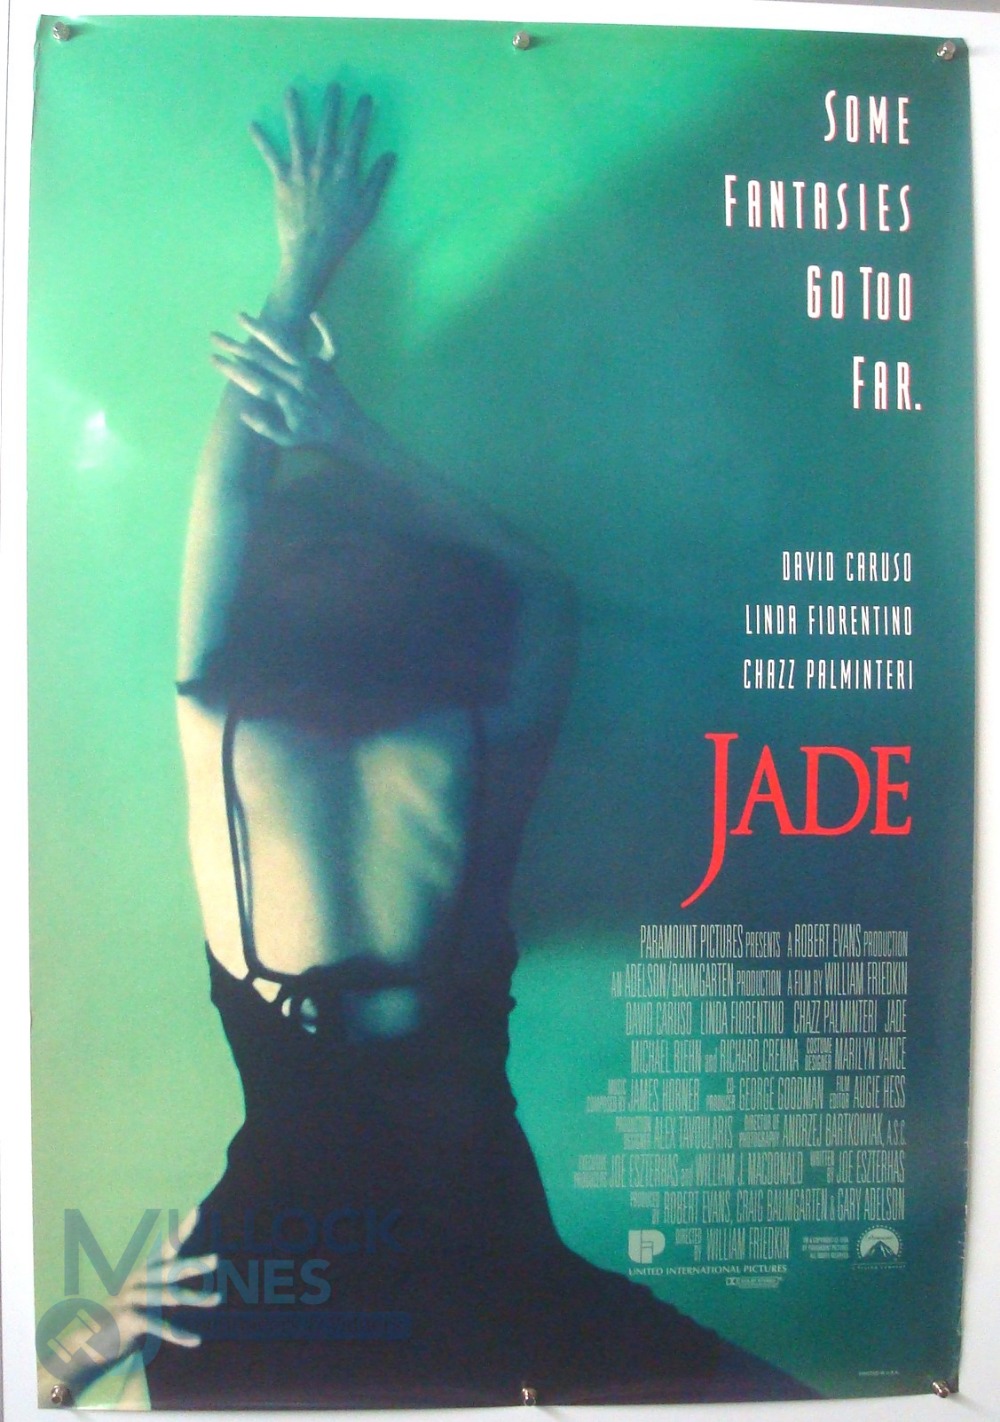 4 Original Movie/Film Posters - Girl 6, Jade, The Client, The Fifth Element - 40x30" approx. kept - Bild 2 aus 4